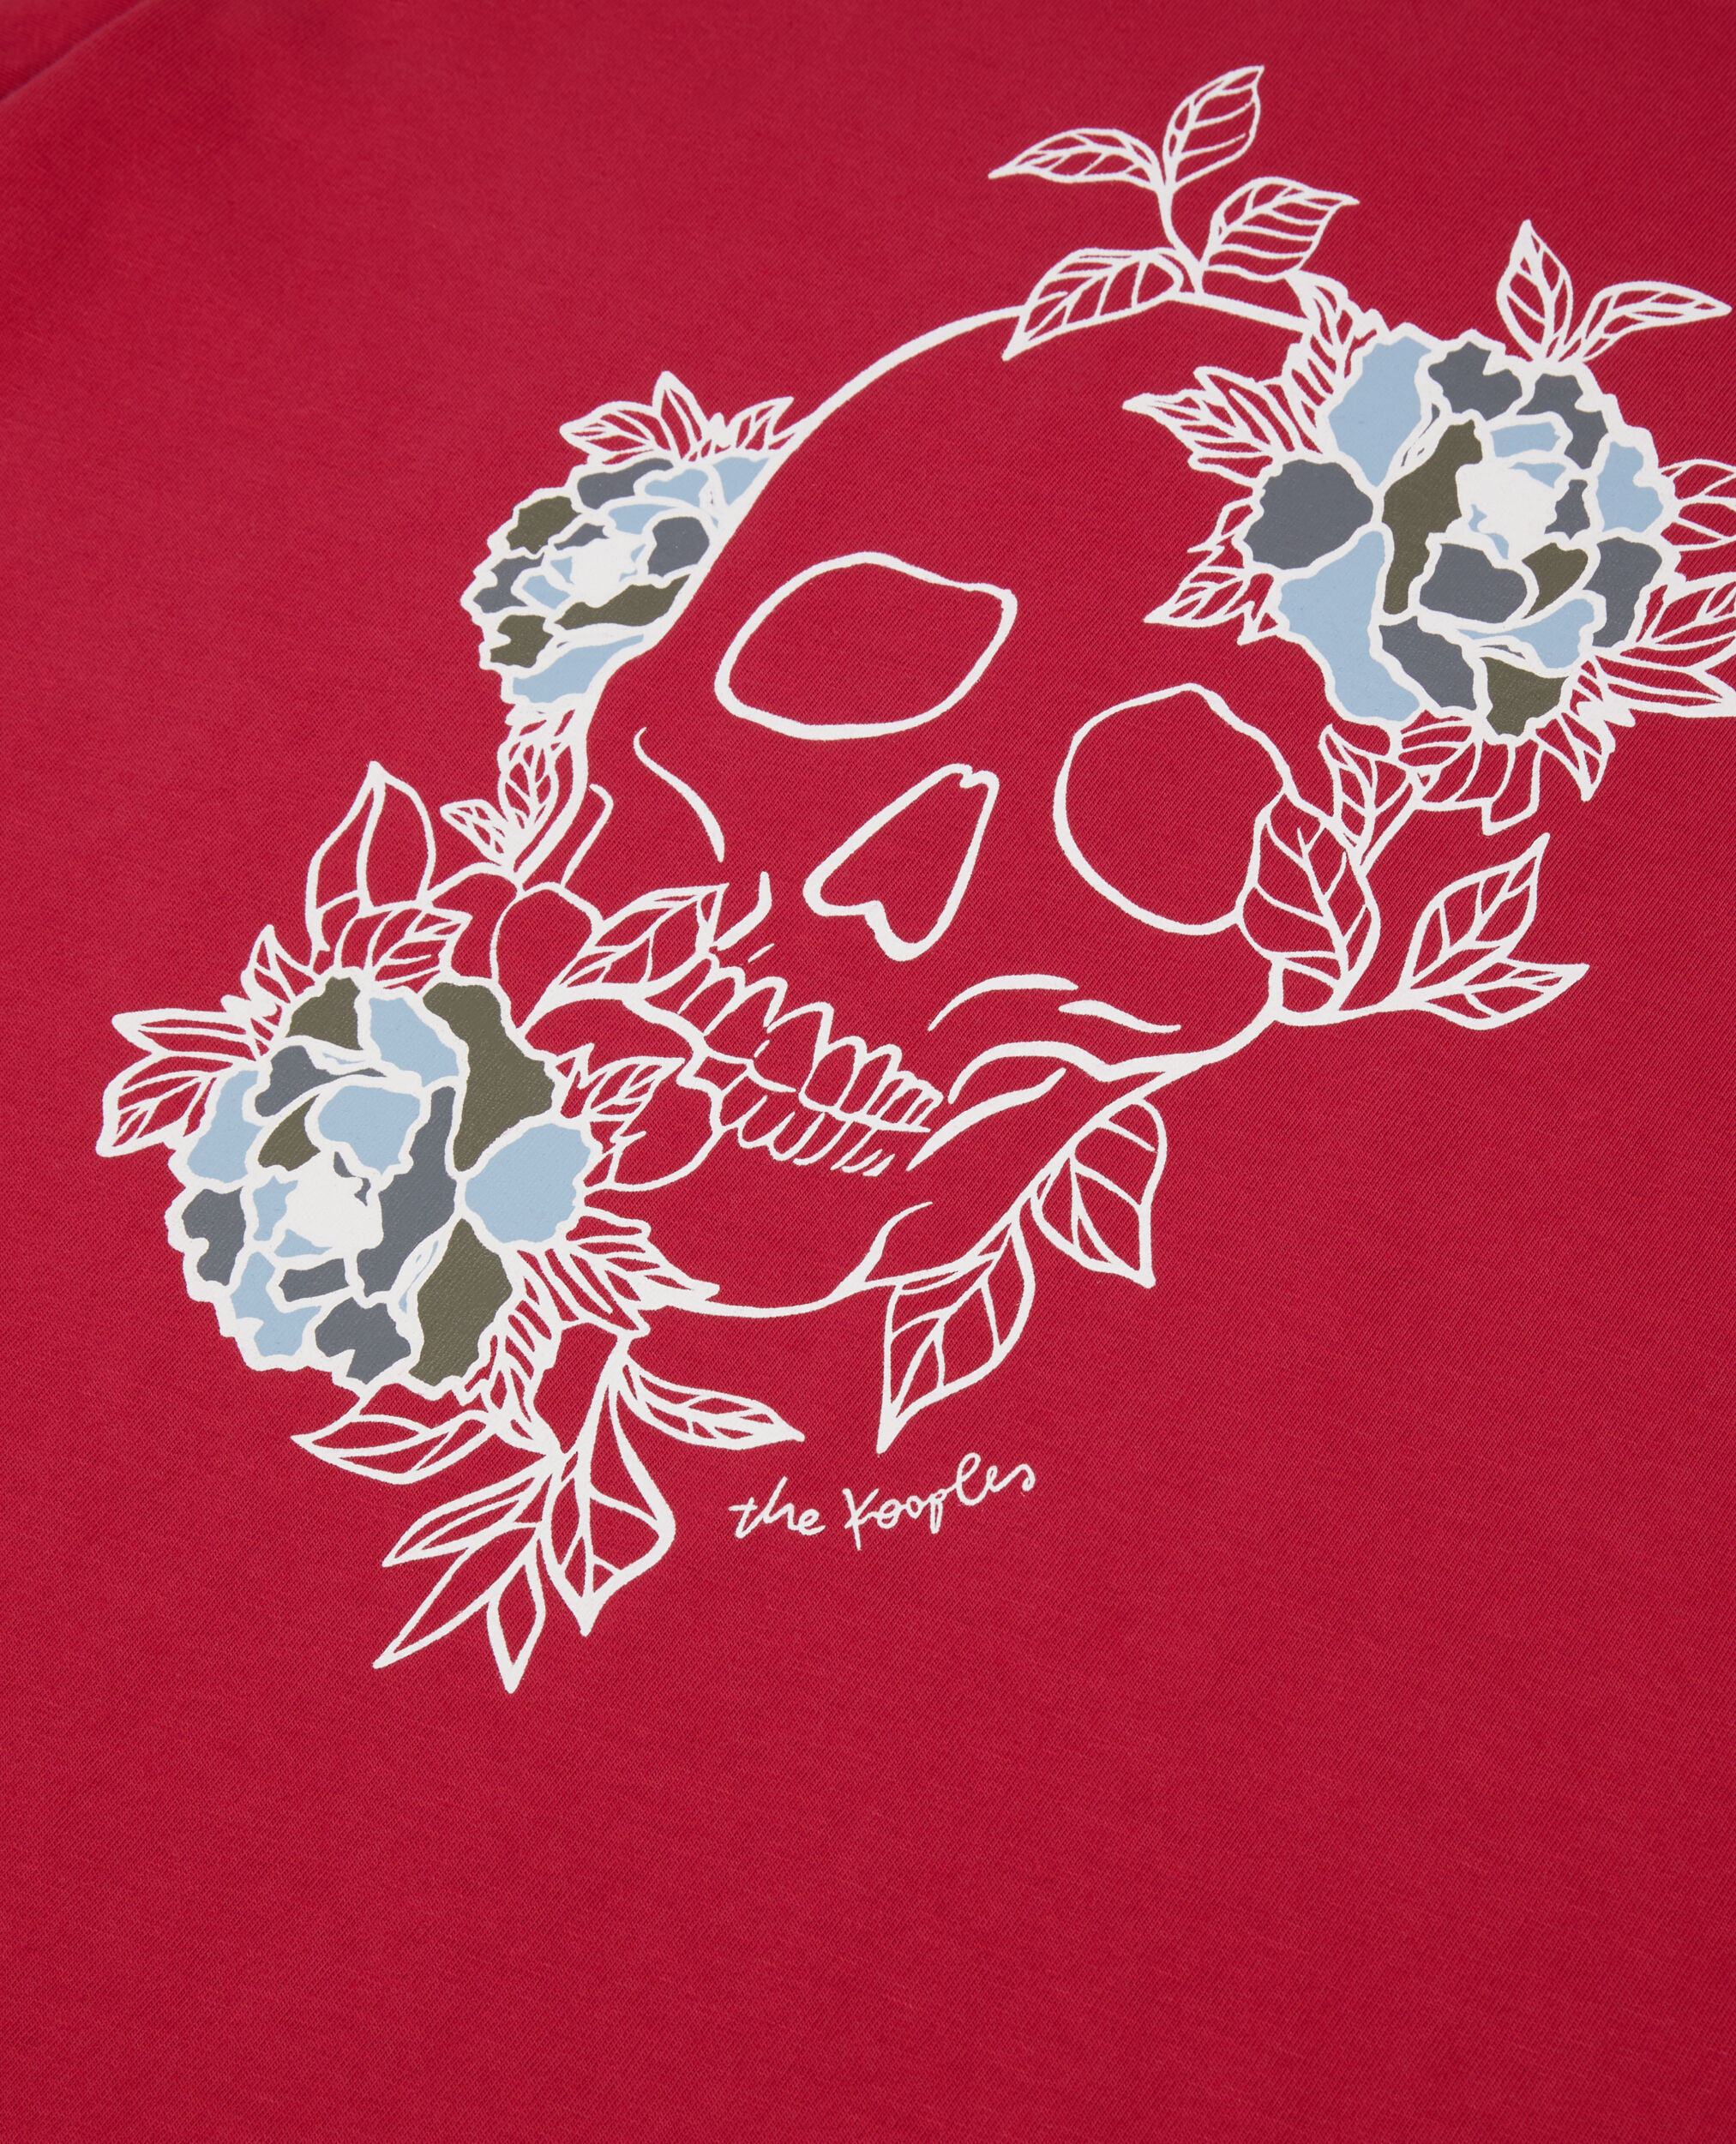 Men's red t-shirt with Flower skull serigraphy, CHERRY, hi-res image number null